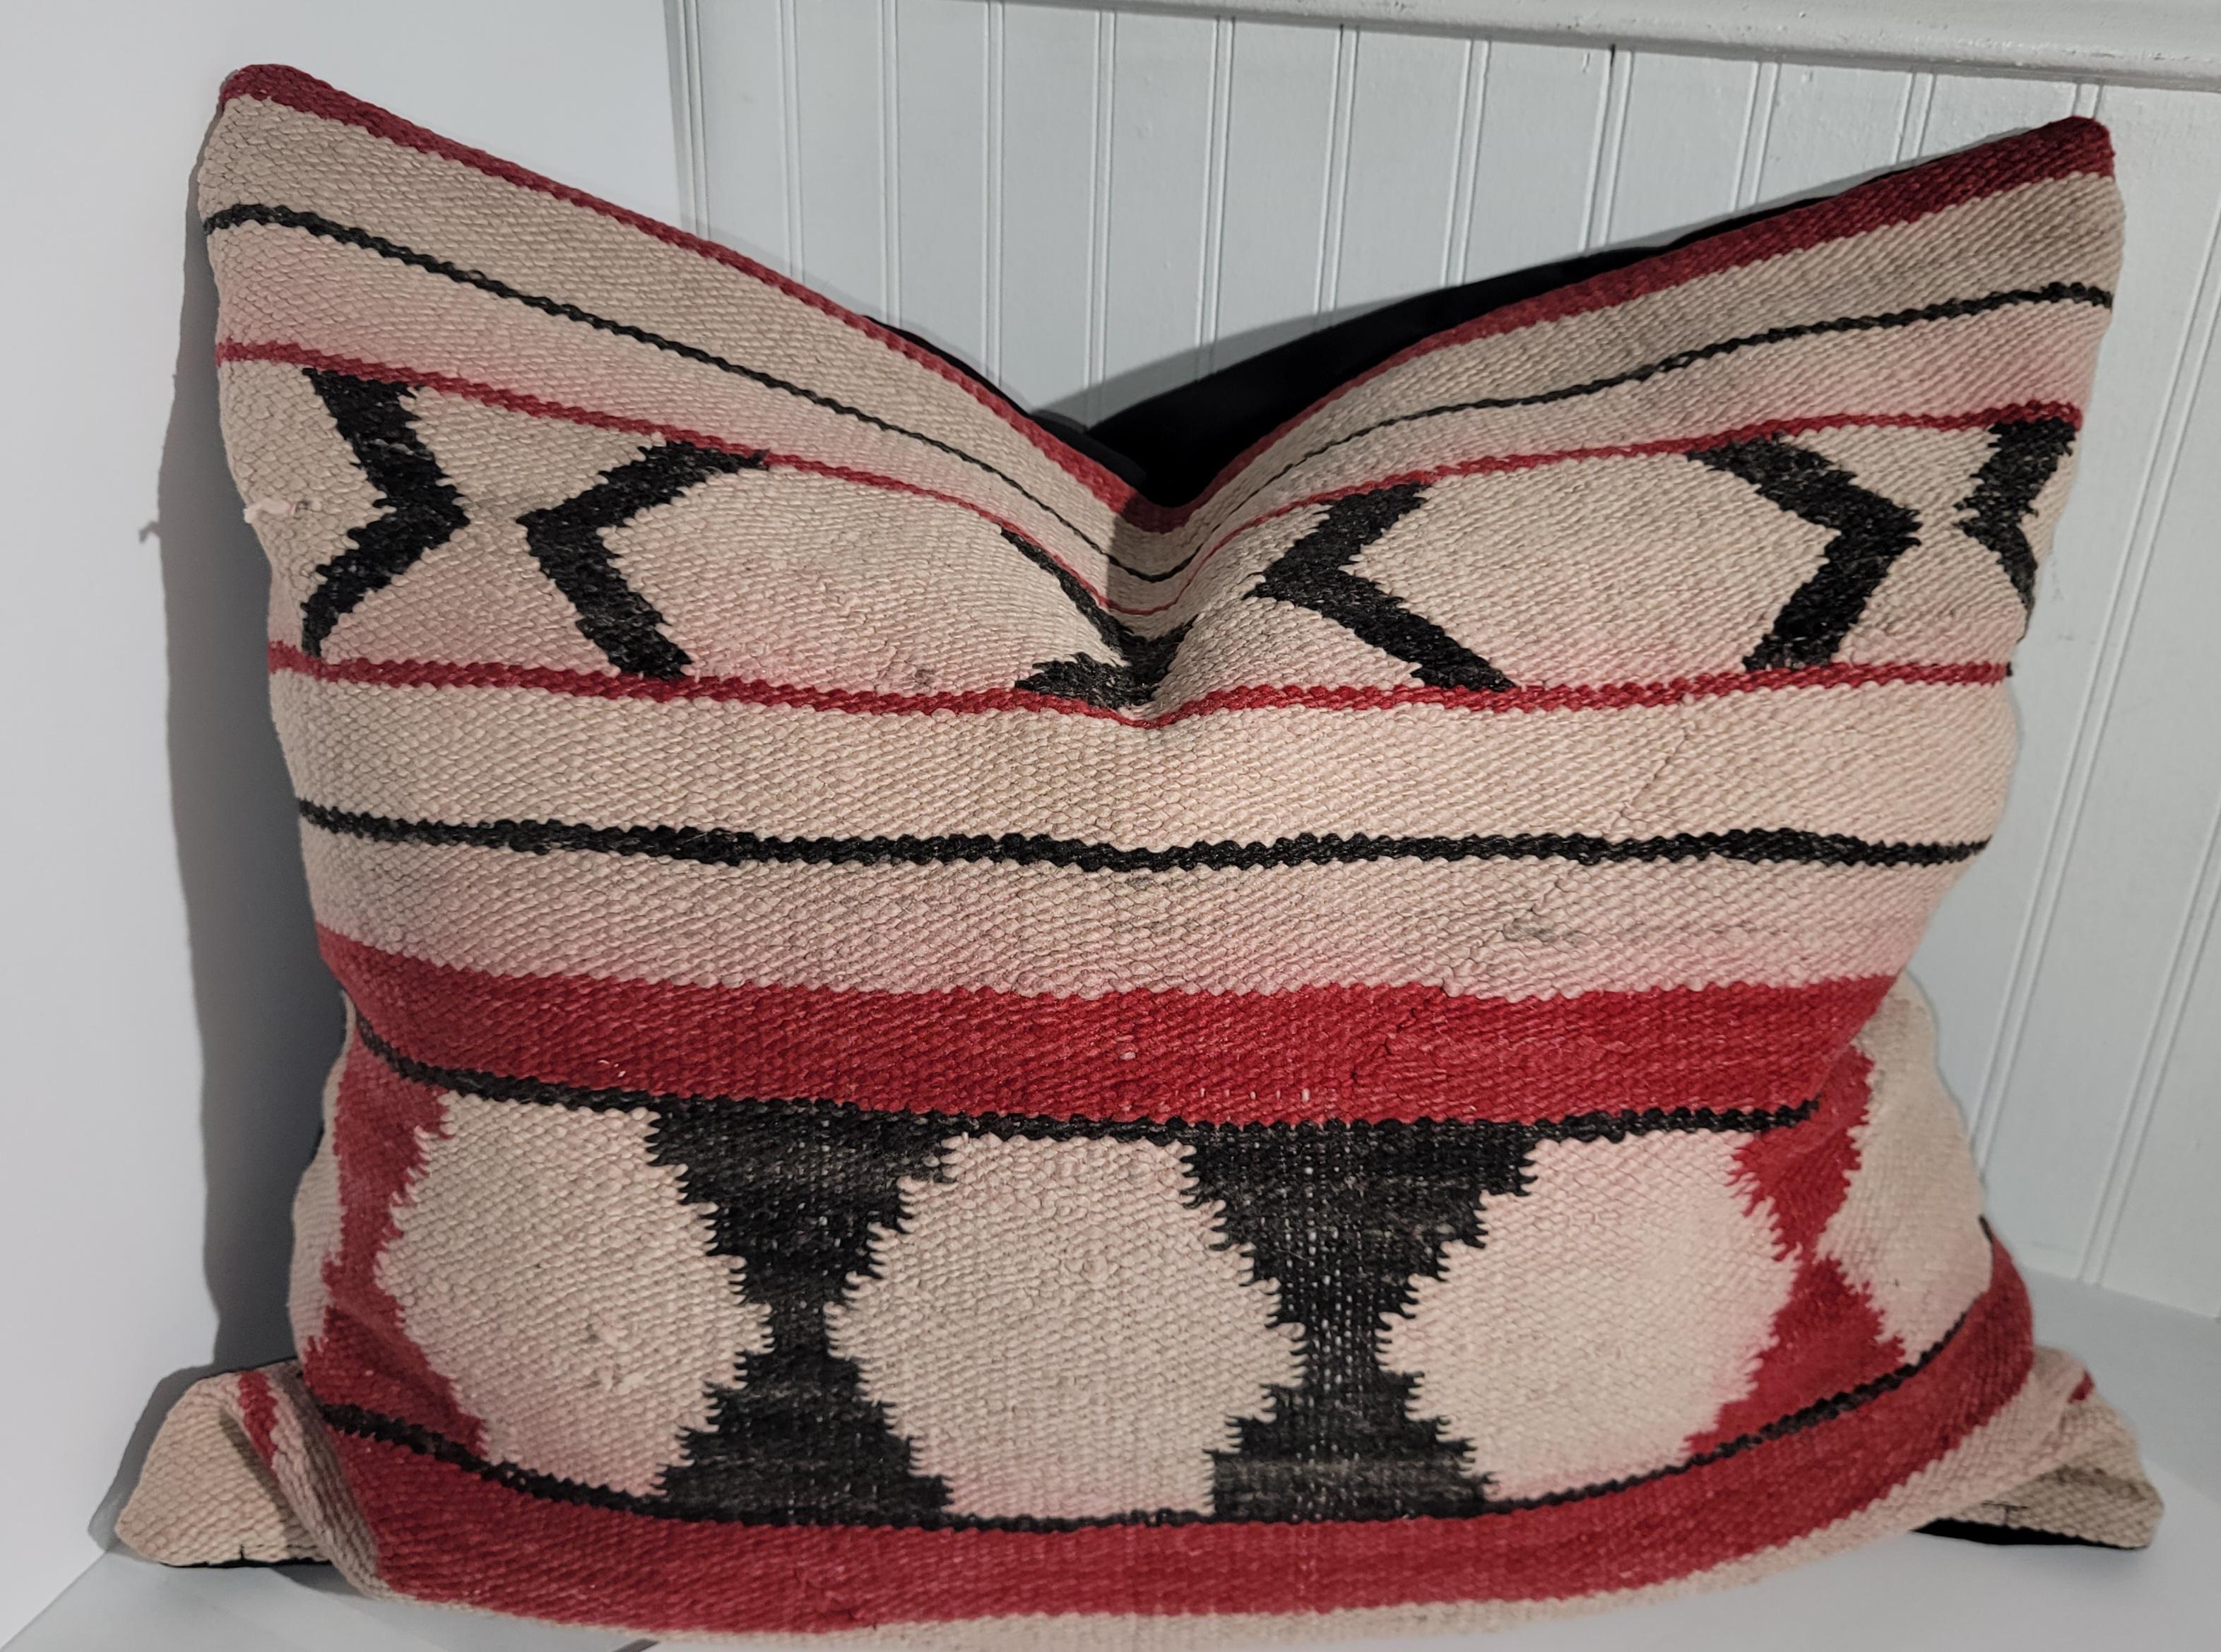 These amazing hand woven pillows with cotton linen backing. These pillows are in good condition and have faded . Larger pillow measures 25 x 27 
smaller pillow measures - 22 x 26 These are being sold as a matched pair.